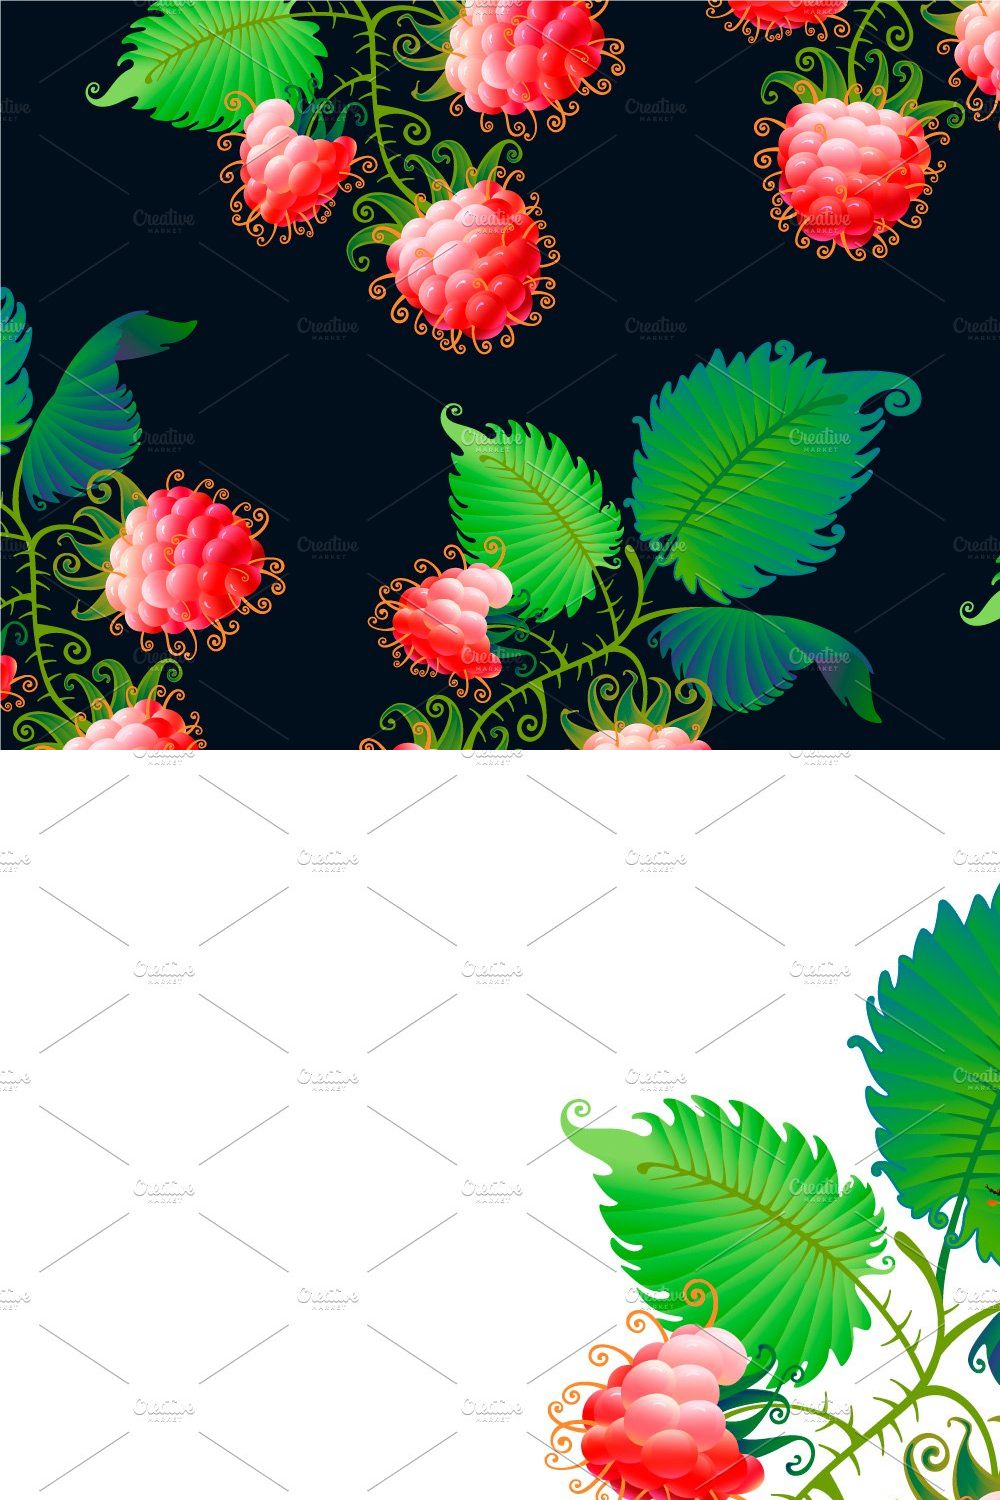 Raspberry. Art and patterns pinterest preview image.